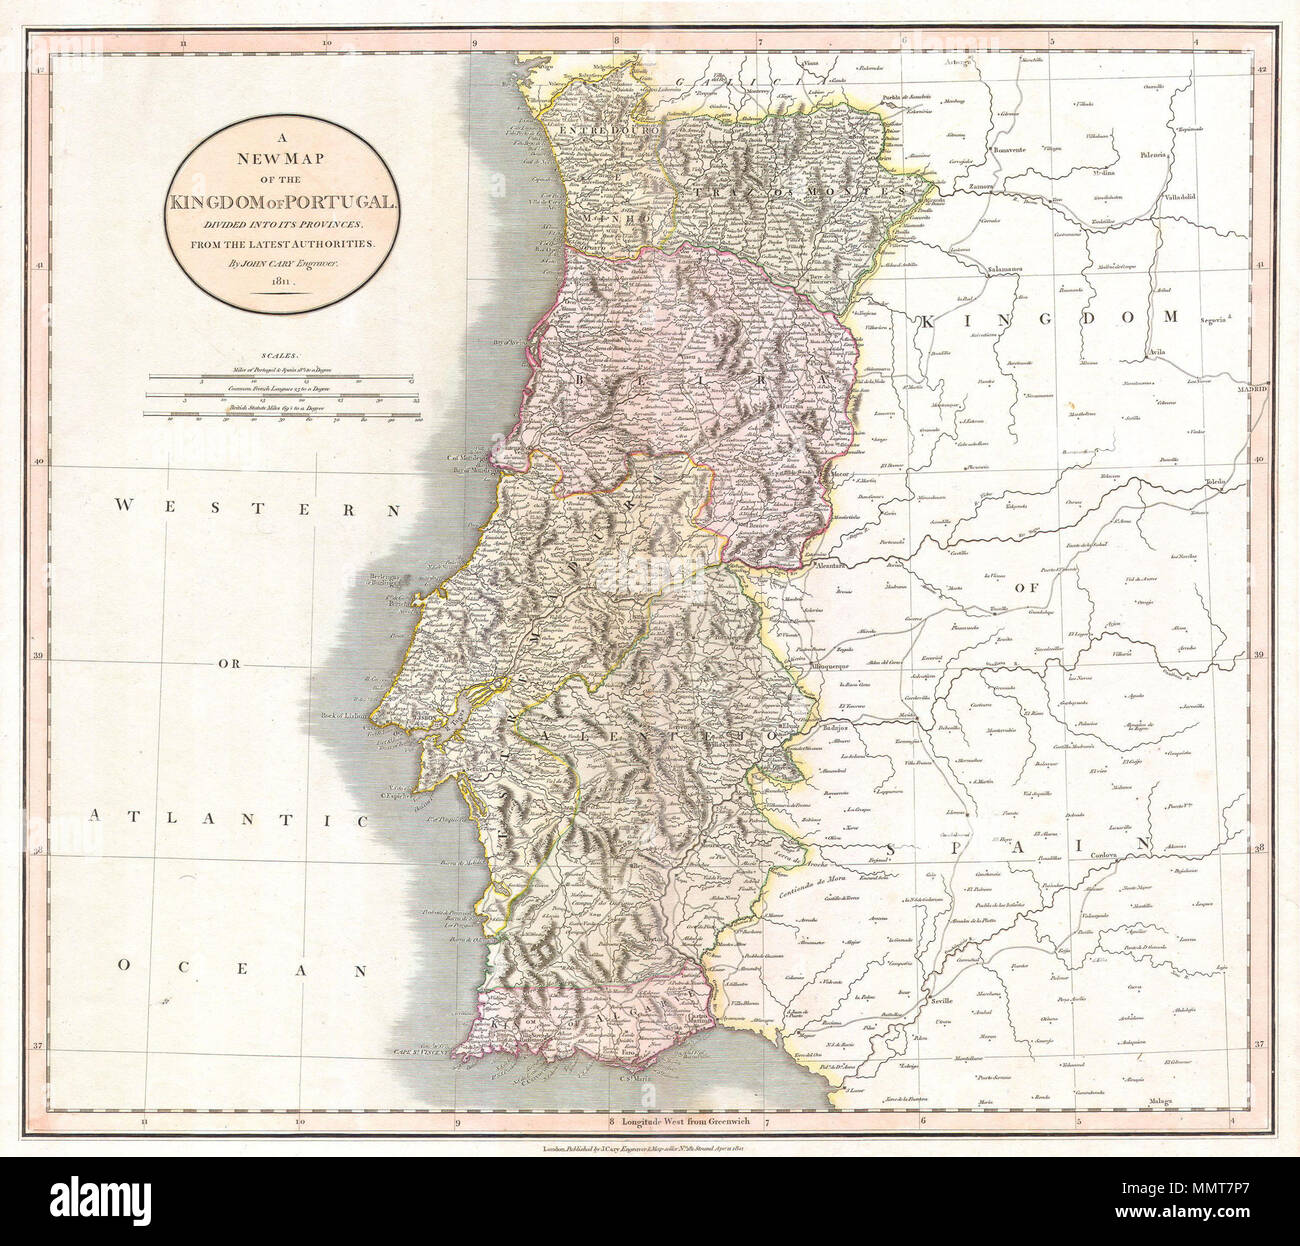 .  English: This is a stunning 1811 map of Portugal by the important late 18th / early 19th century Edinburgh cartographer John Cary. Fully depicts the country and its various regions. The popular resort province of Algarve, is listed as its own Kingdom. Dated, London, April 21, 1811.  A New Map of the Kingdom of Portugal. Divided into its Provinces. From the Latest Authorities.. 1811. 1811 Cary Map of the Kingdom of Portugal - Geographicus - Portugal-cary-1811 Stock Photo